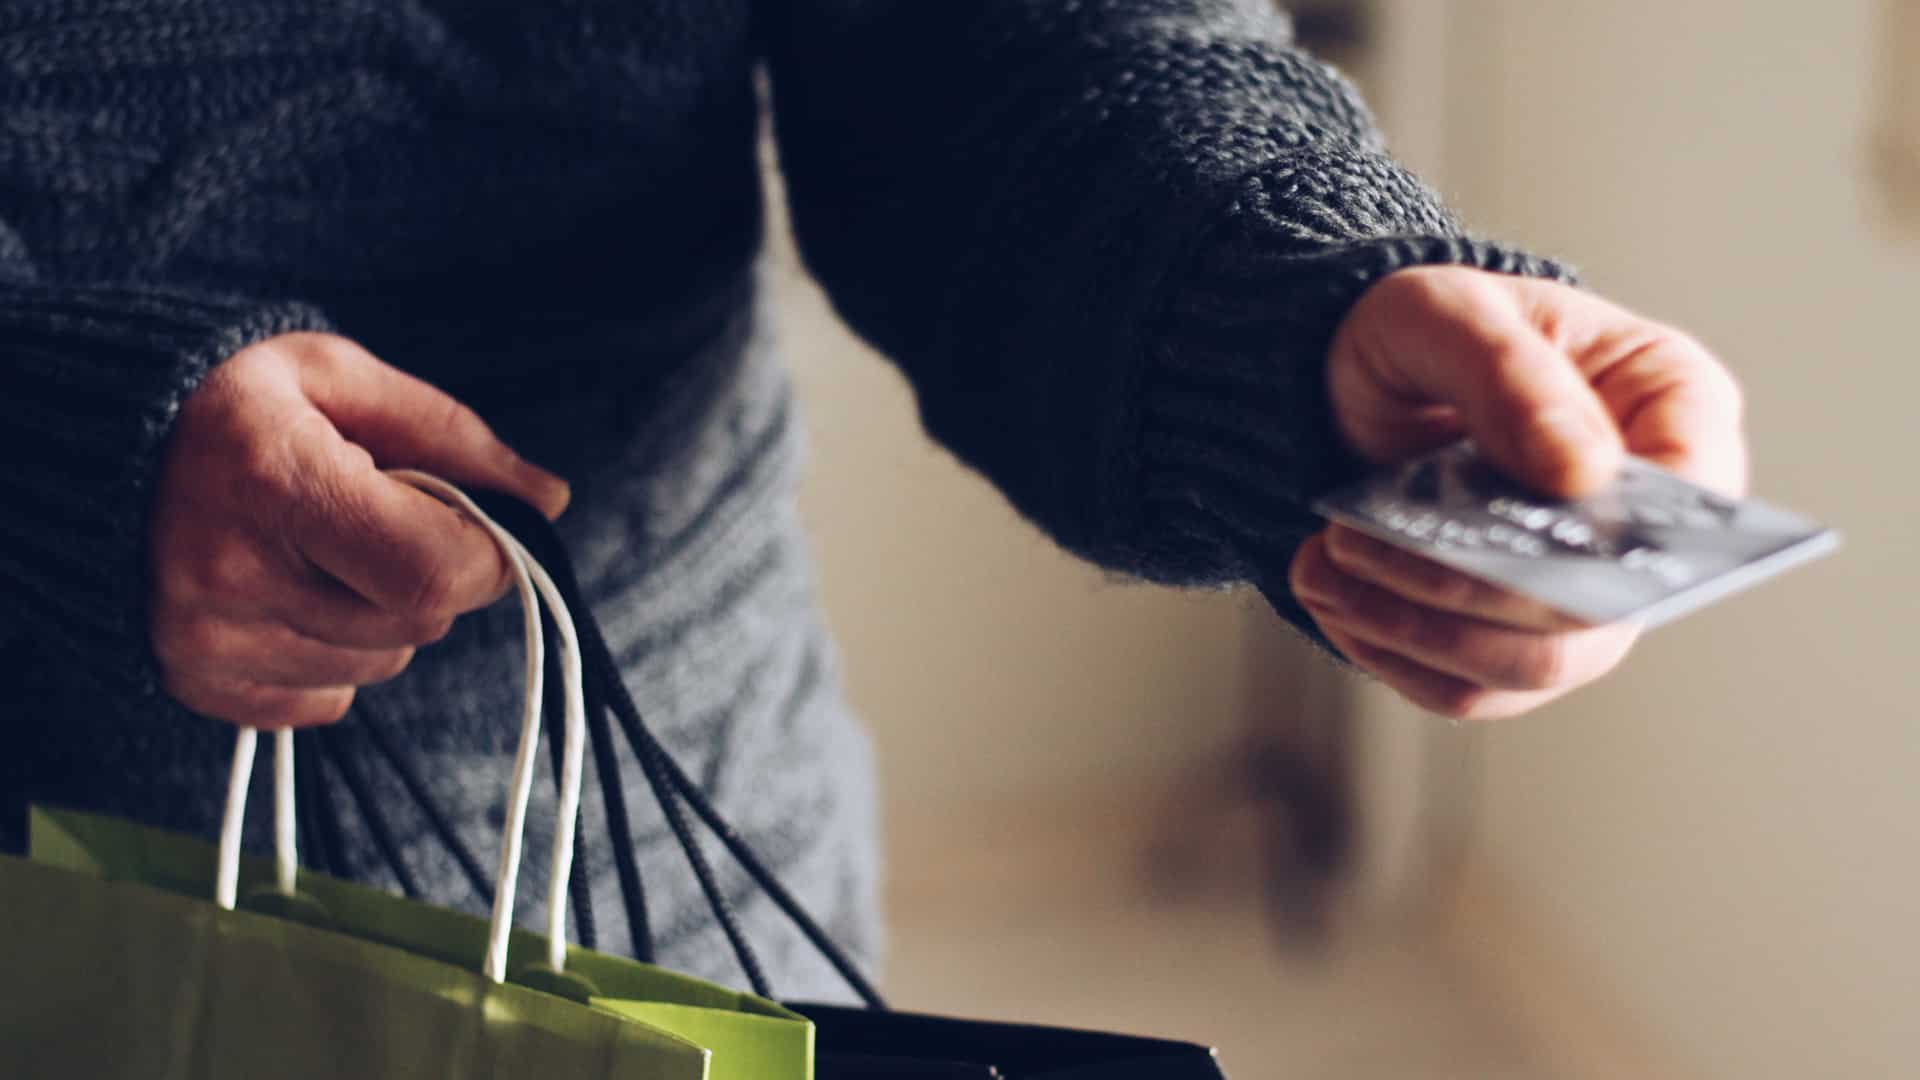 paying with debit card holding shopping bags